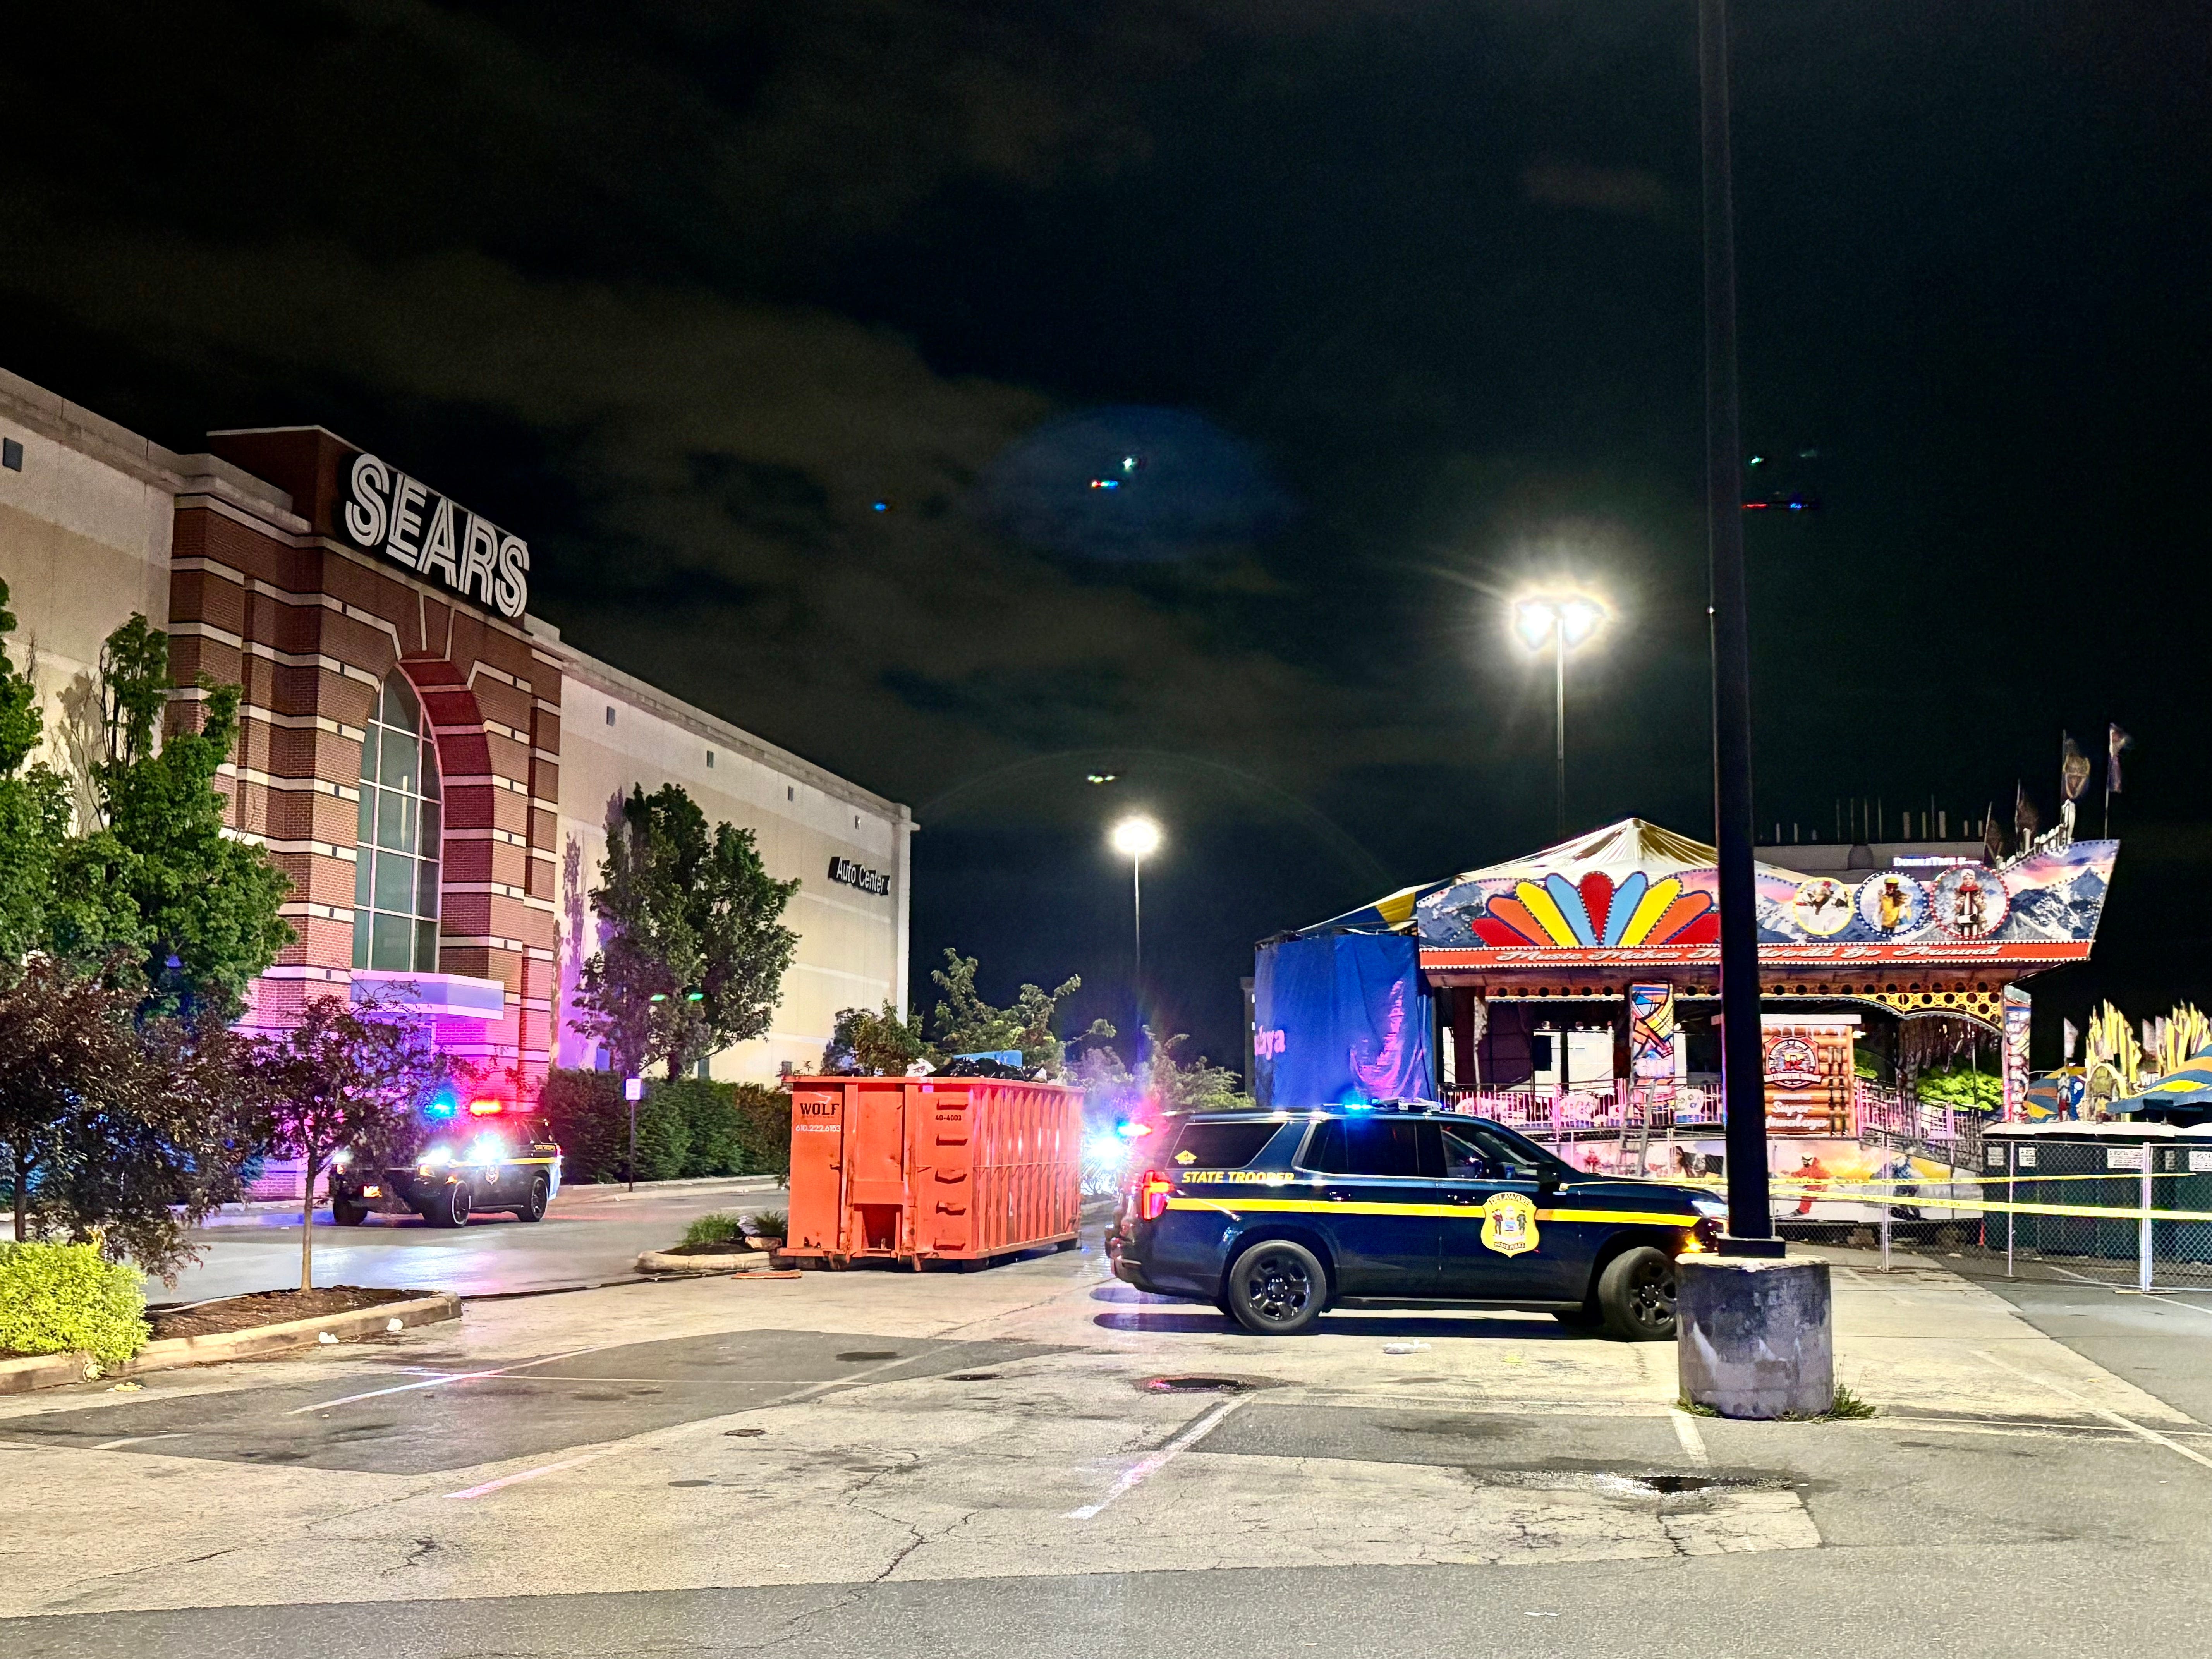 2 shot at Concord Mall during Saturday night carnival: First responders